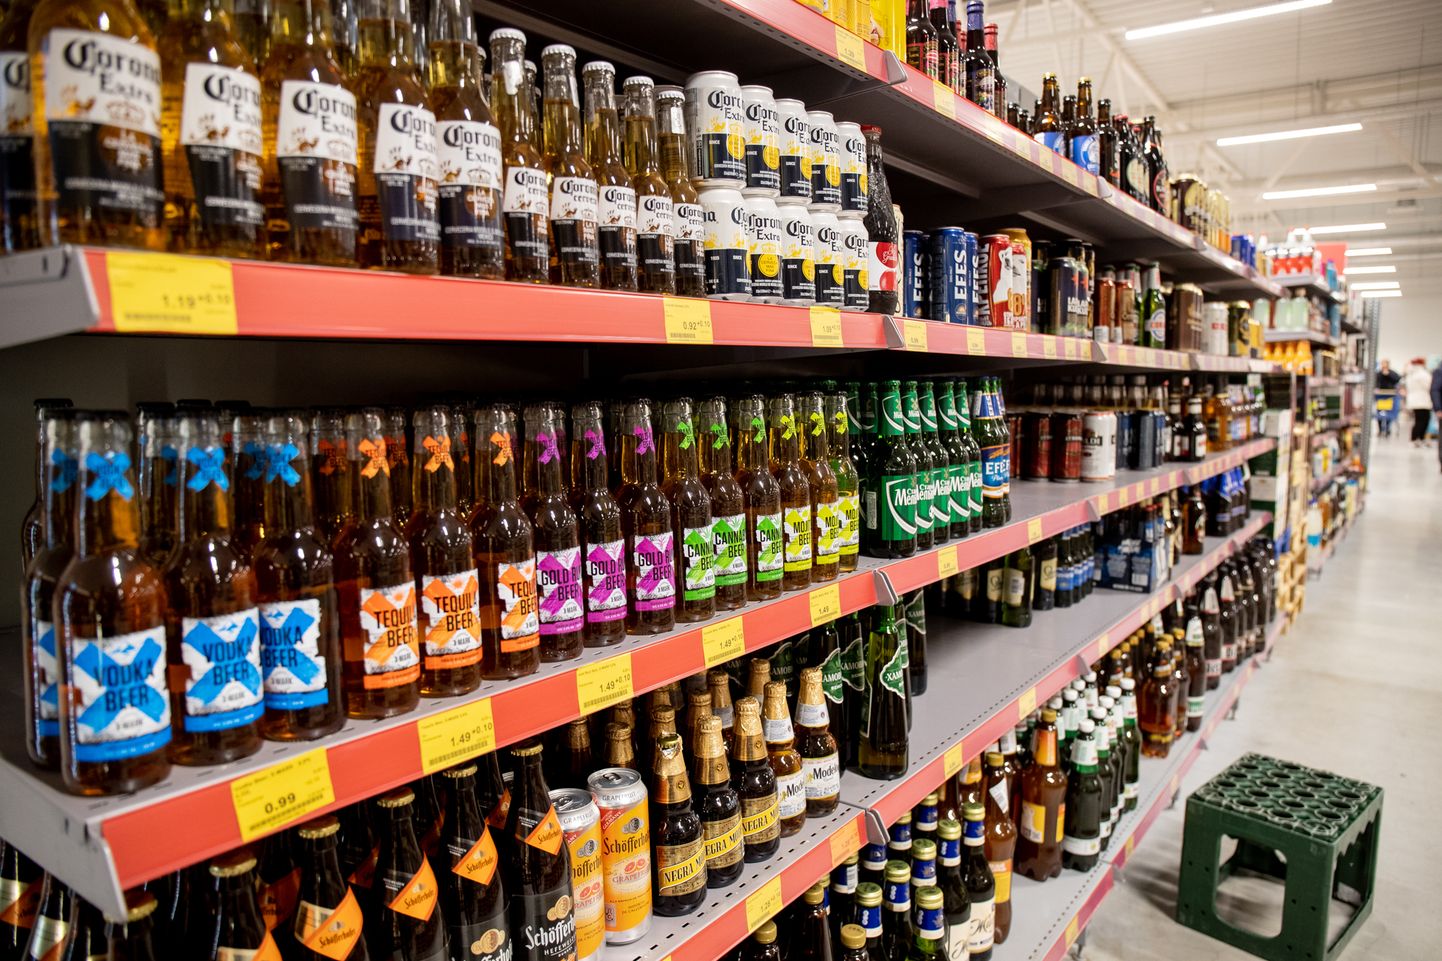 Estonian parlt passes bill increasing excise duties on alcohol, tobacco products.